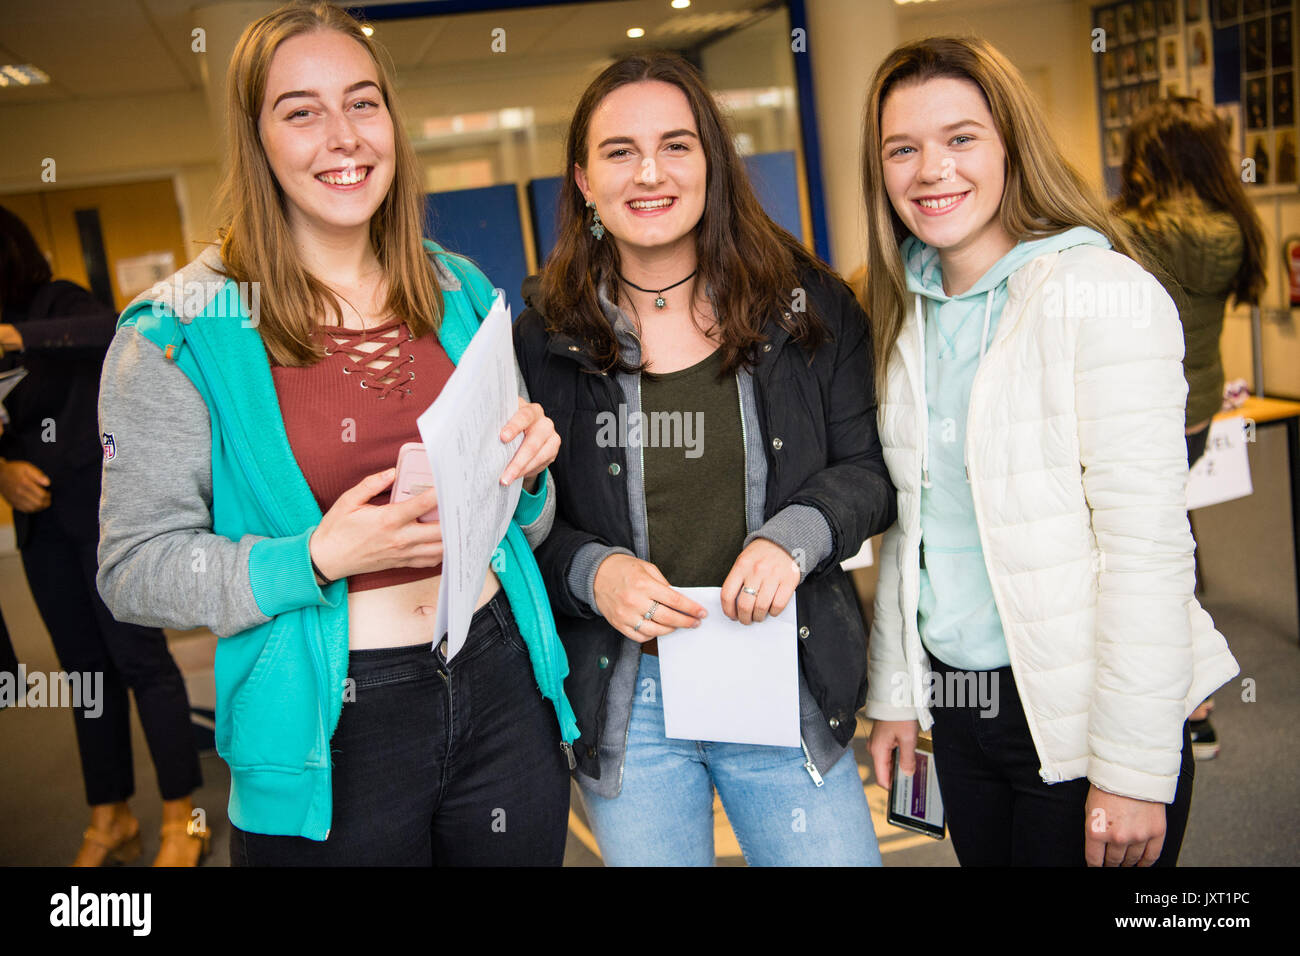 Aberystwyth Wales UK, Thursday 17 August 2017 Education in the UK : Pupils at Penglais School, Aberystwyth, looking happy after collecting their A level and AS level results photo Credit: Keith Morris/Alamy Live News Stock Photo